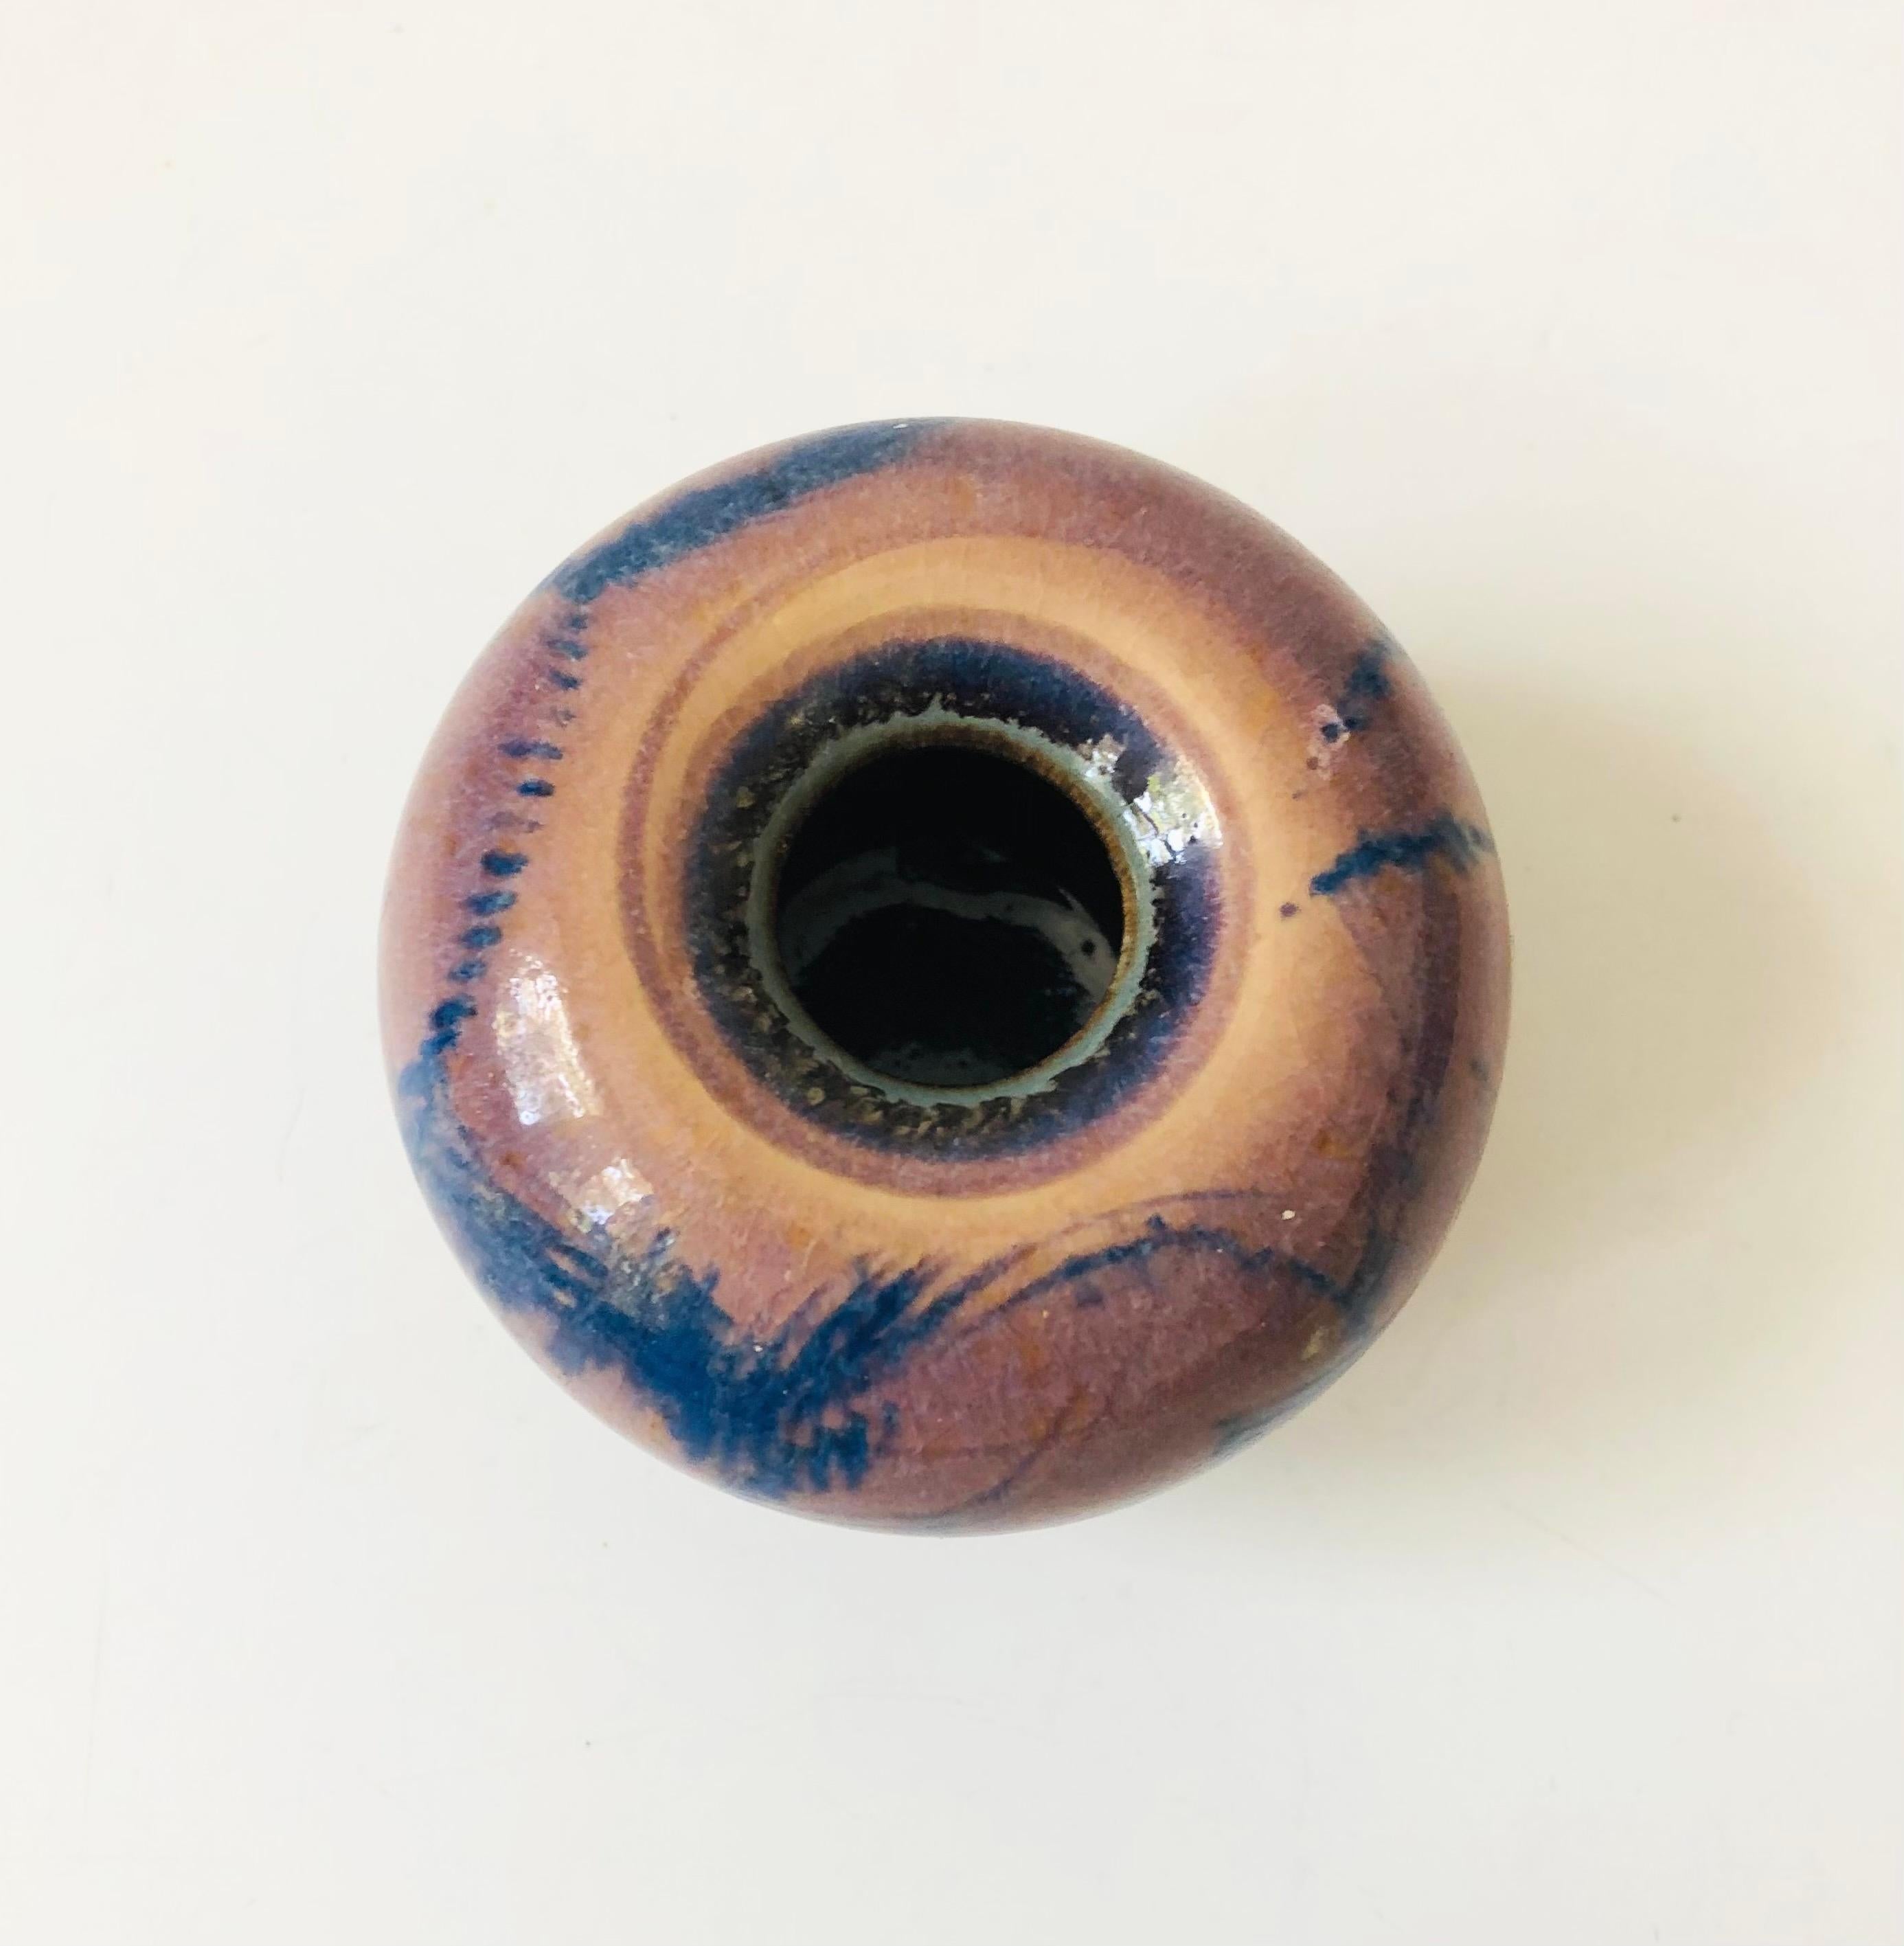 A beautiful wheel thrown studio pottery vase by ceramicist, Barbara Sebastian of Marin, CA. Decorated in purple and blue glazes. Signed on the base.

